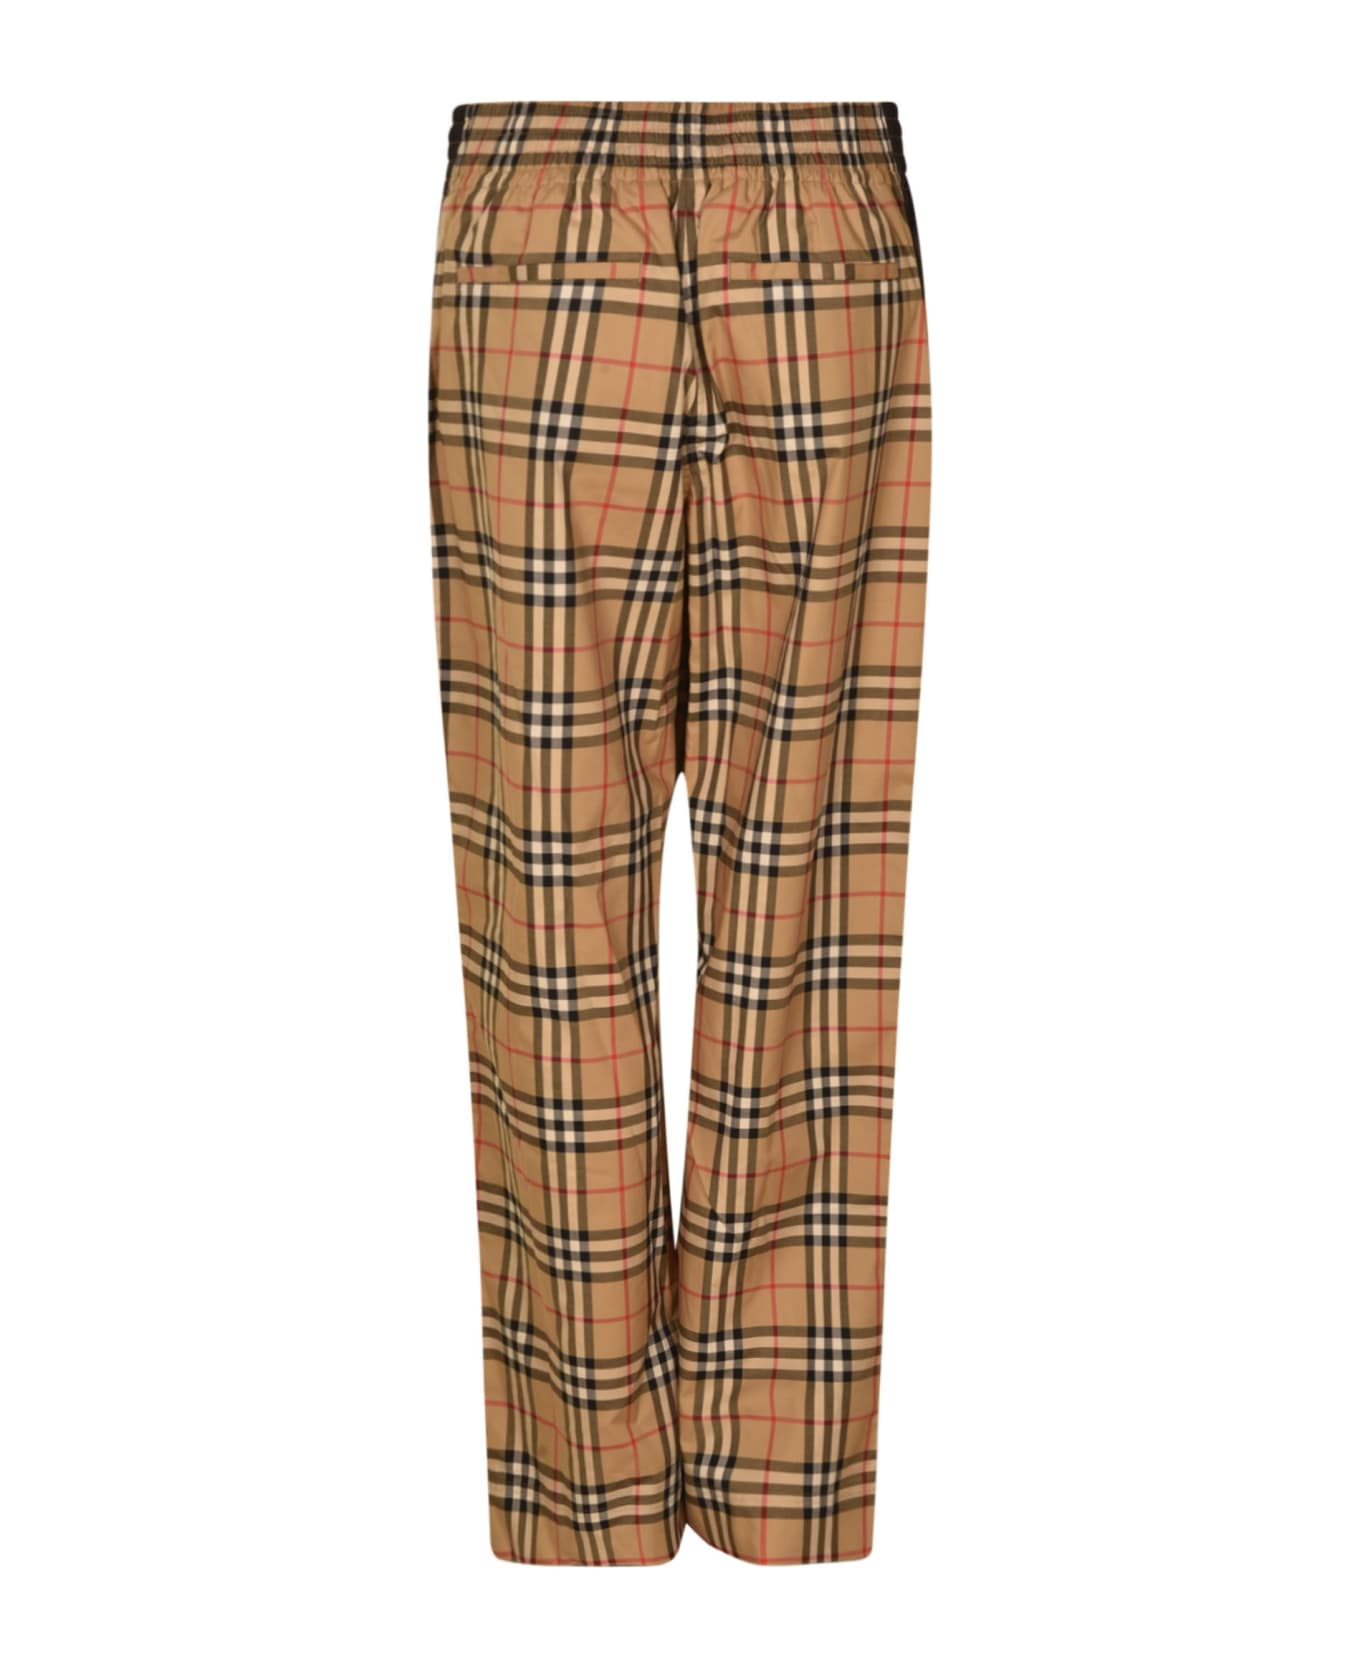 Burberry Elastic Waist Check Trousers - Archive beige ip check ボトムス